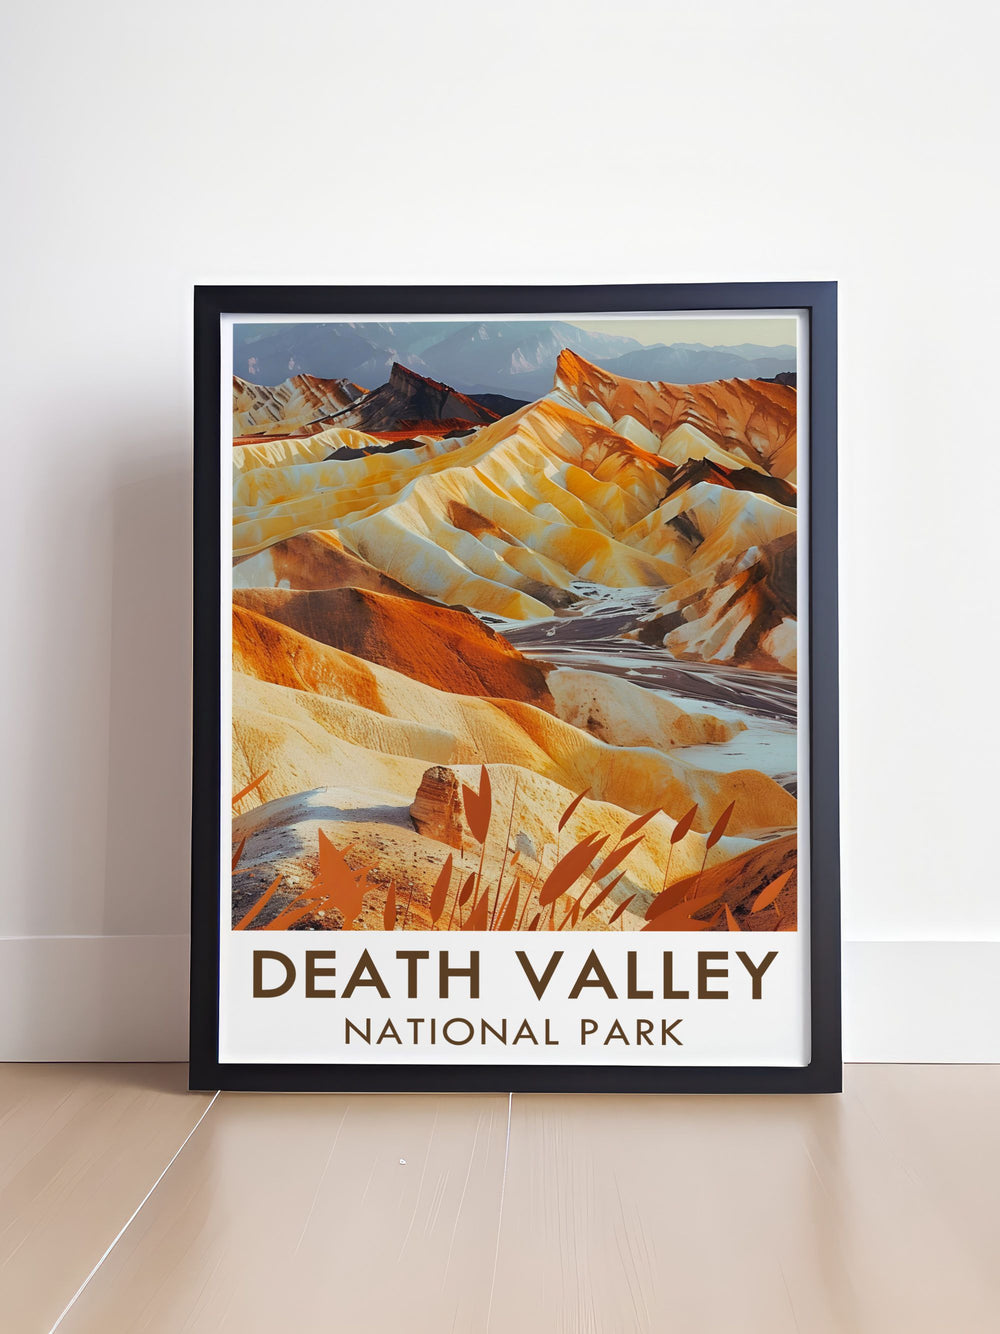 Travel poster featuring Zabriskie Point in Death Valley, highlighting the stunning views of the badlands and dramatic vistas of the park, ideal for adding a touch of desert beauty to your decor.